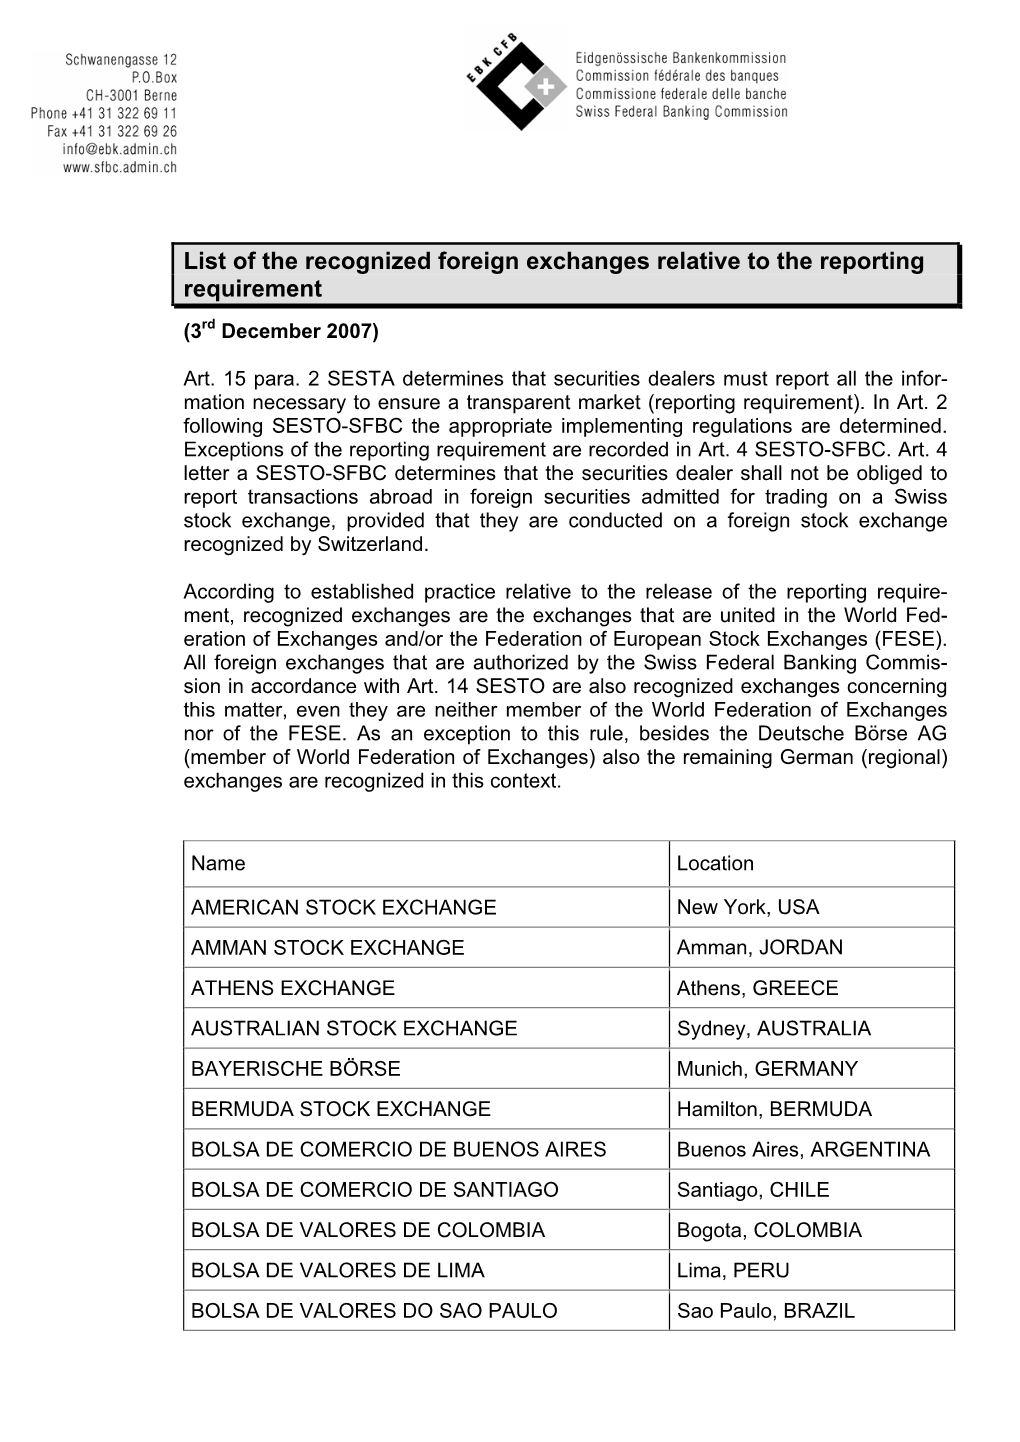 List of the Recognized Foreign Exchanges Relative to the Reporting Requirement (3Rd December 2007)